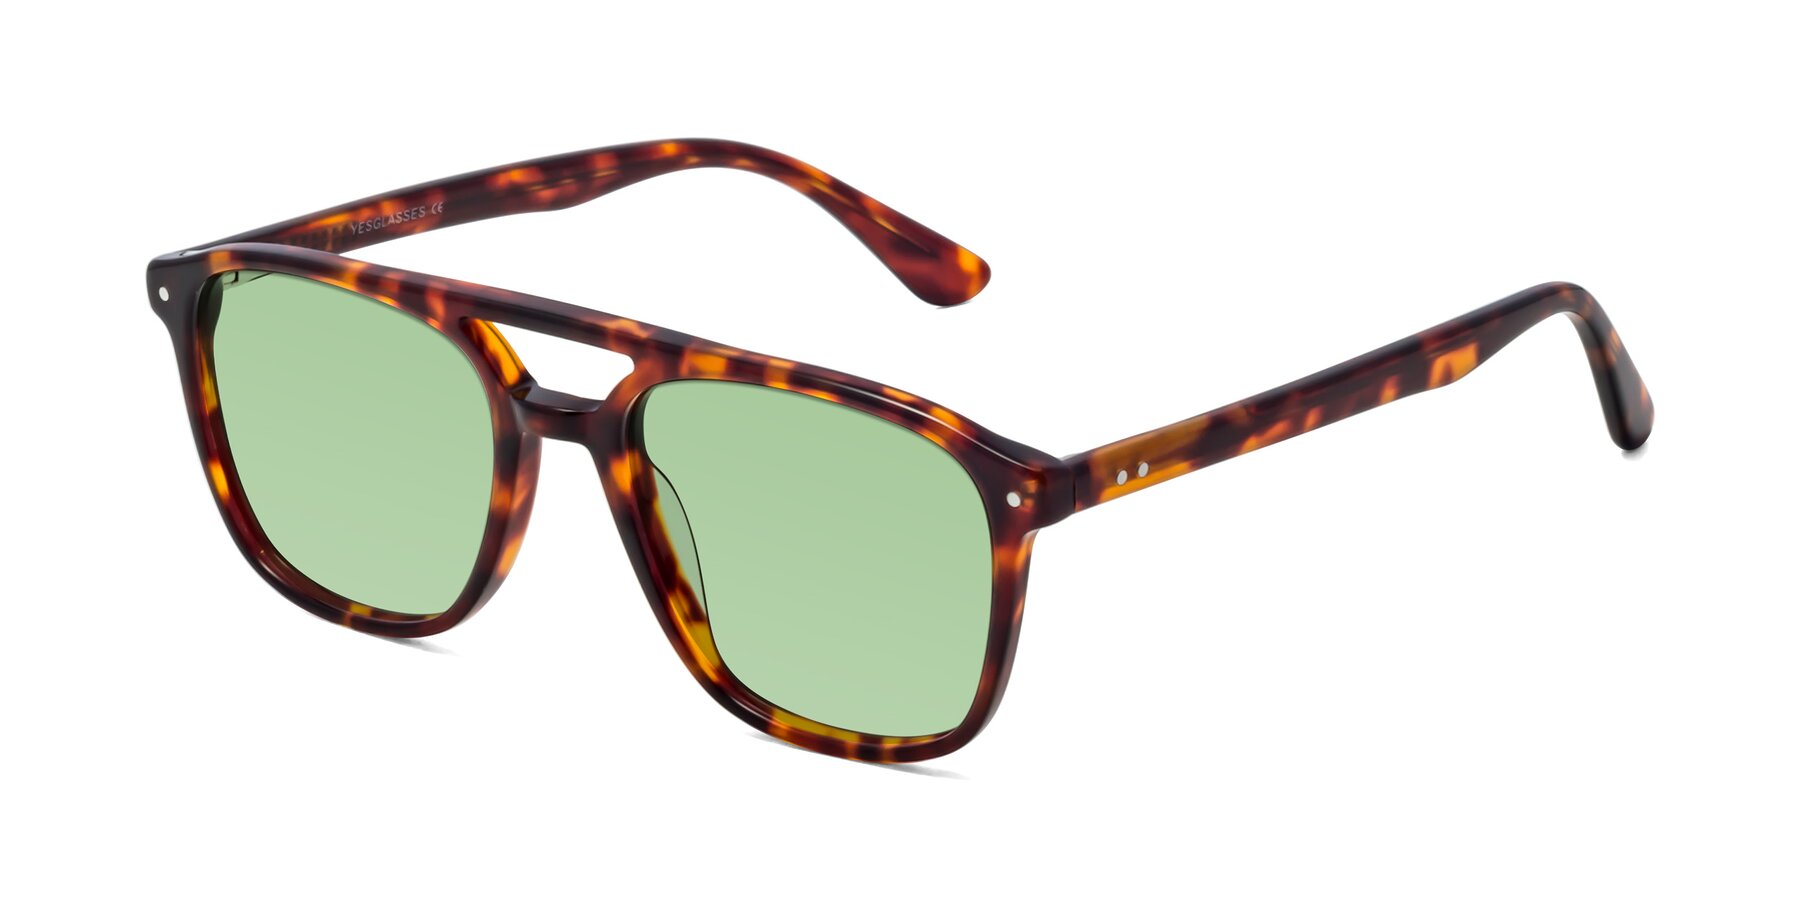 Angle of Quantum in Tortoise with Medium Green Tinted Lenses